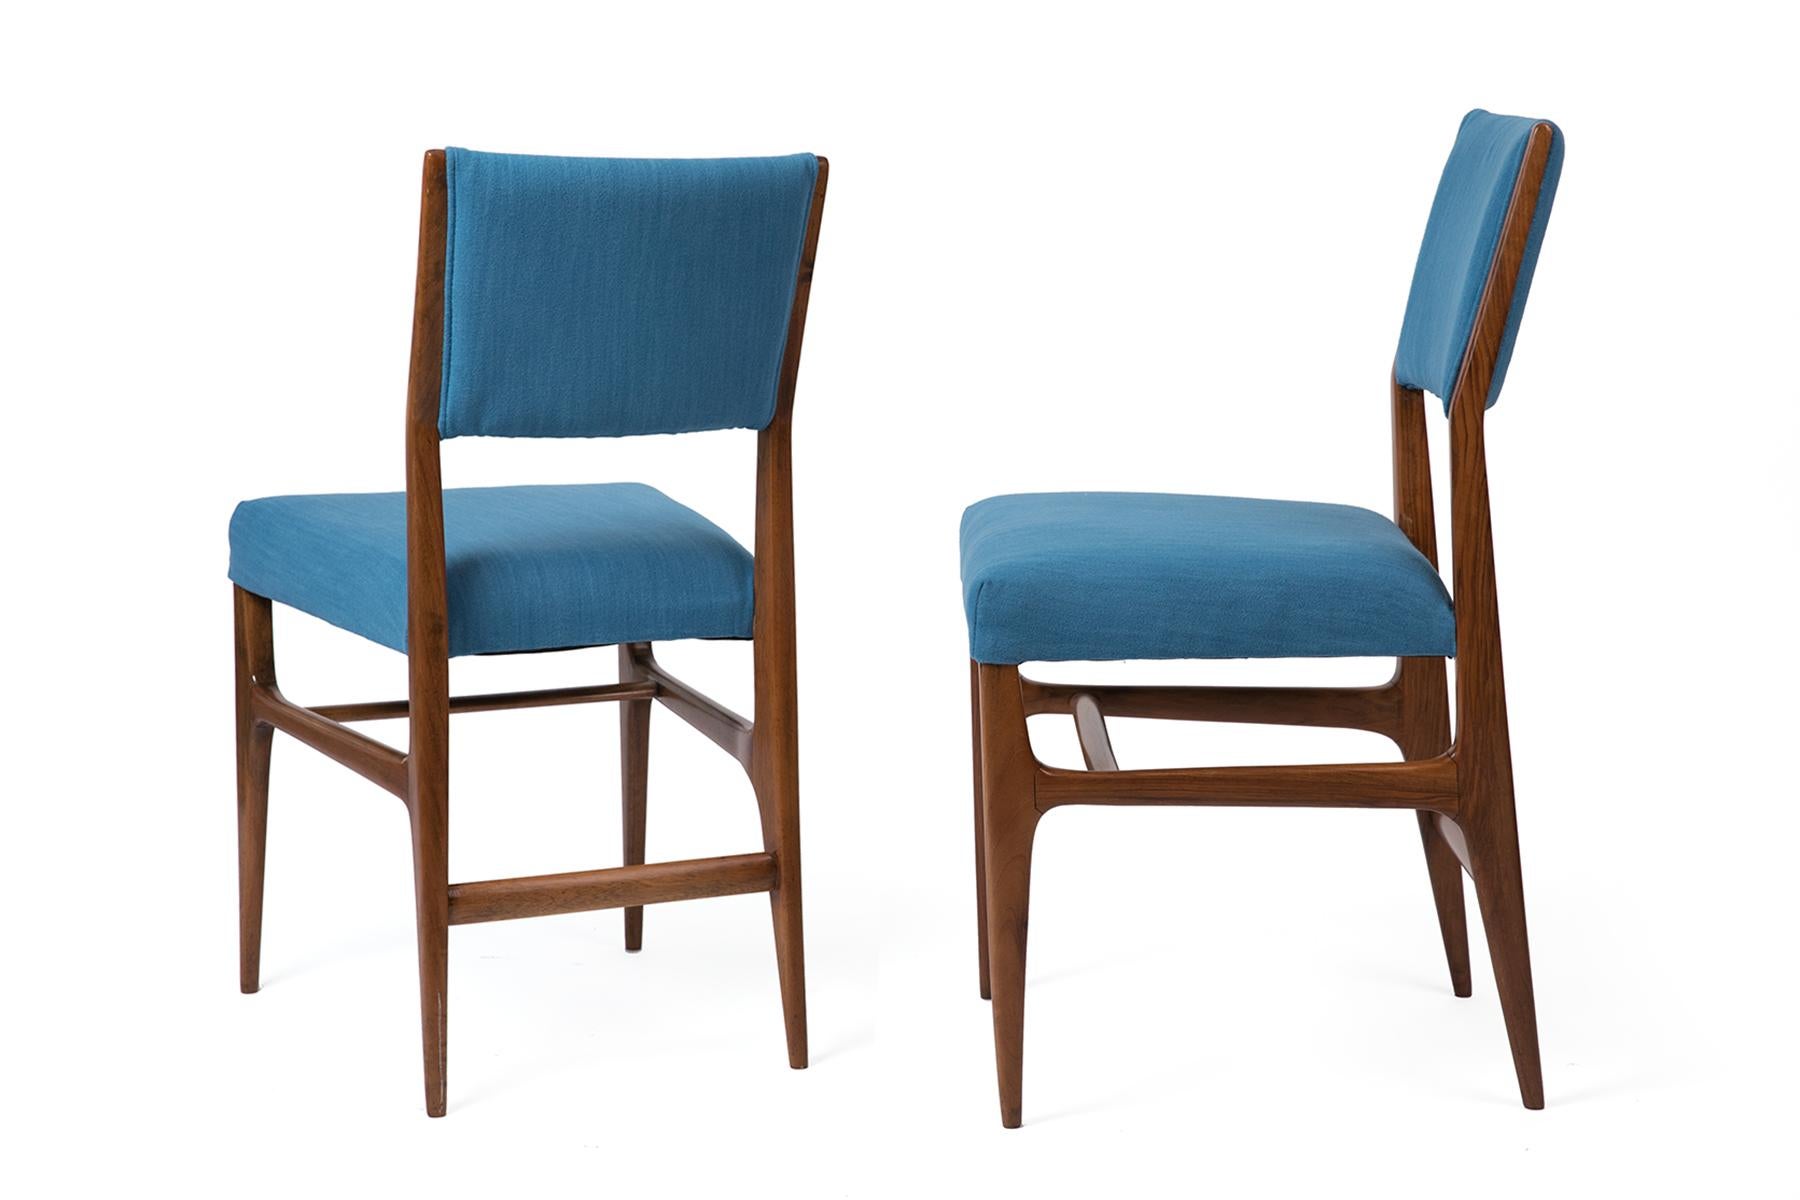 Mid-Century Modern Gio Ponti Walnut Dining Chairs for Singer & Sons with Blue Upholstery, Set of 4 